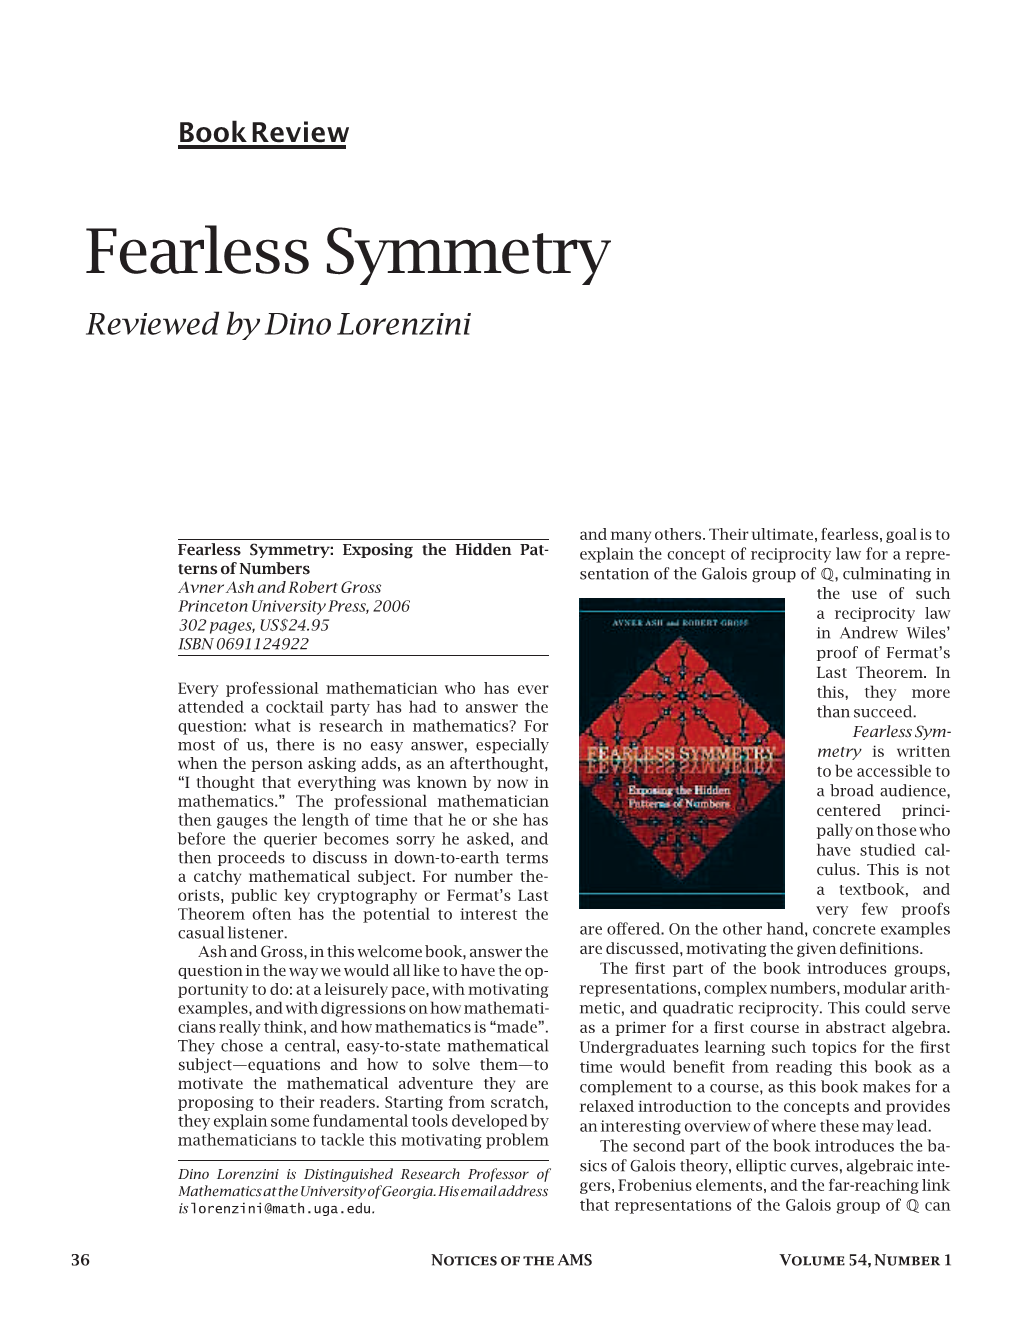 Book Review: Fearless Symmetry, Volume 54, Number 1